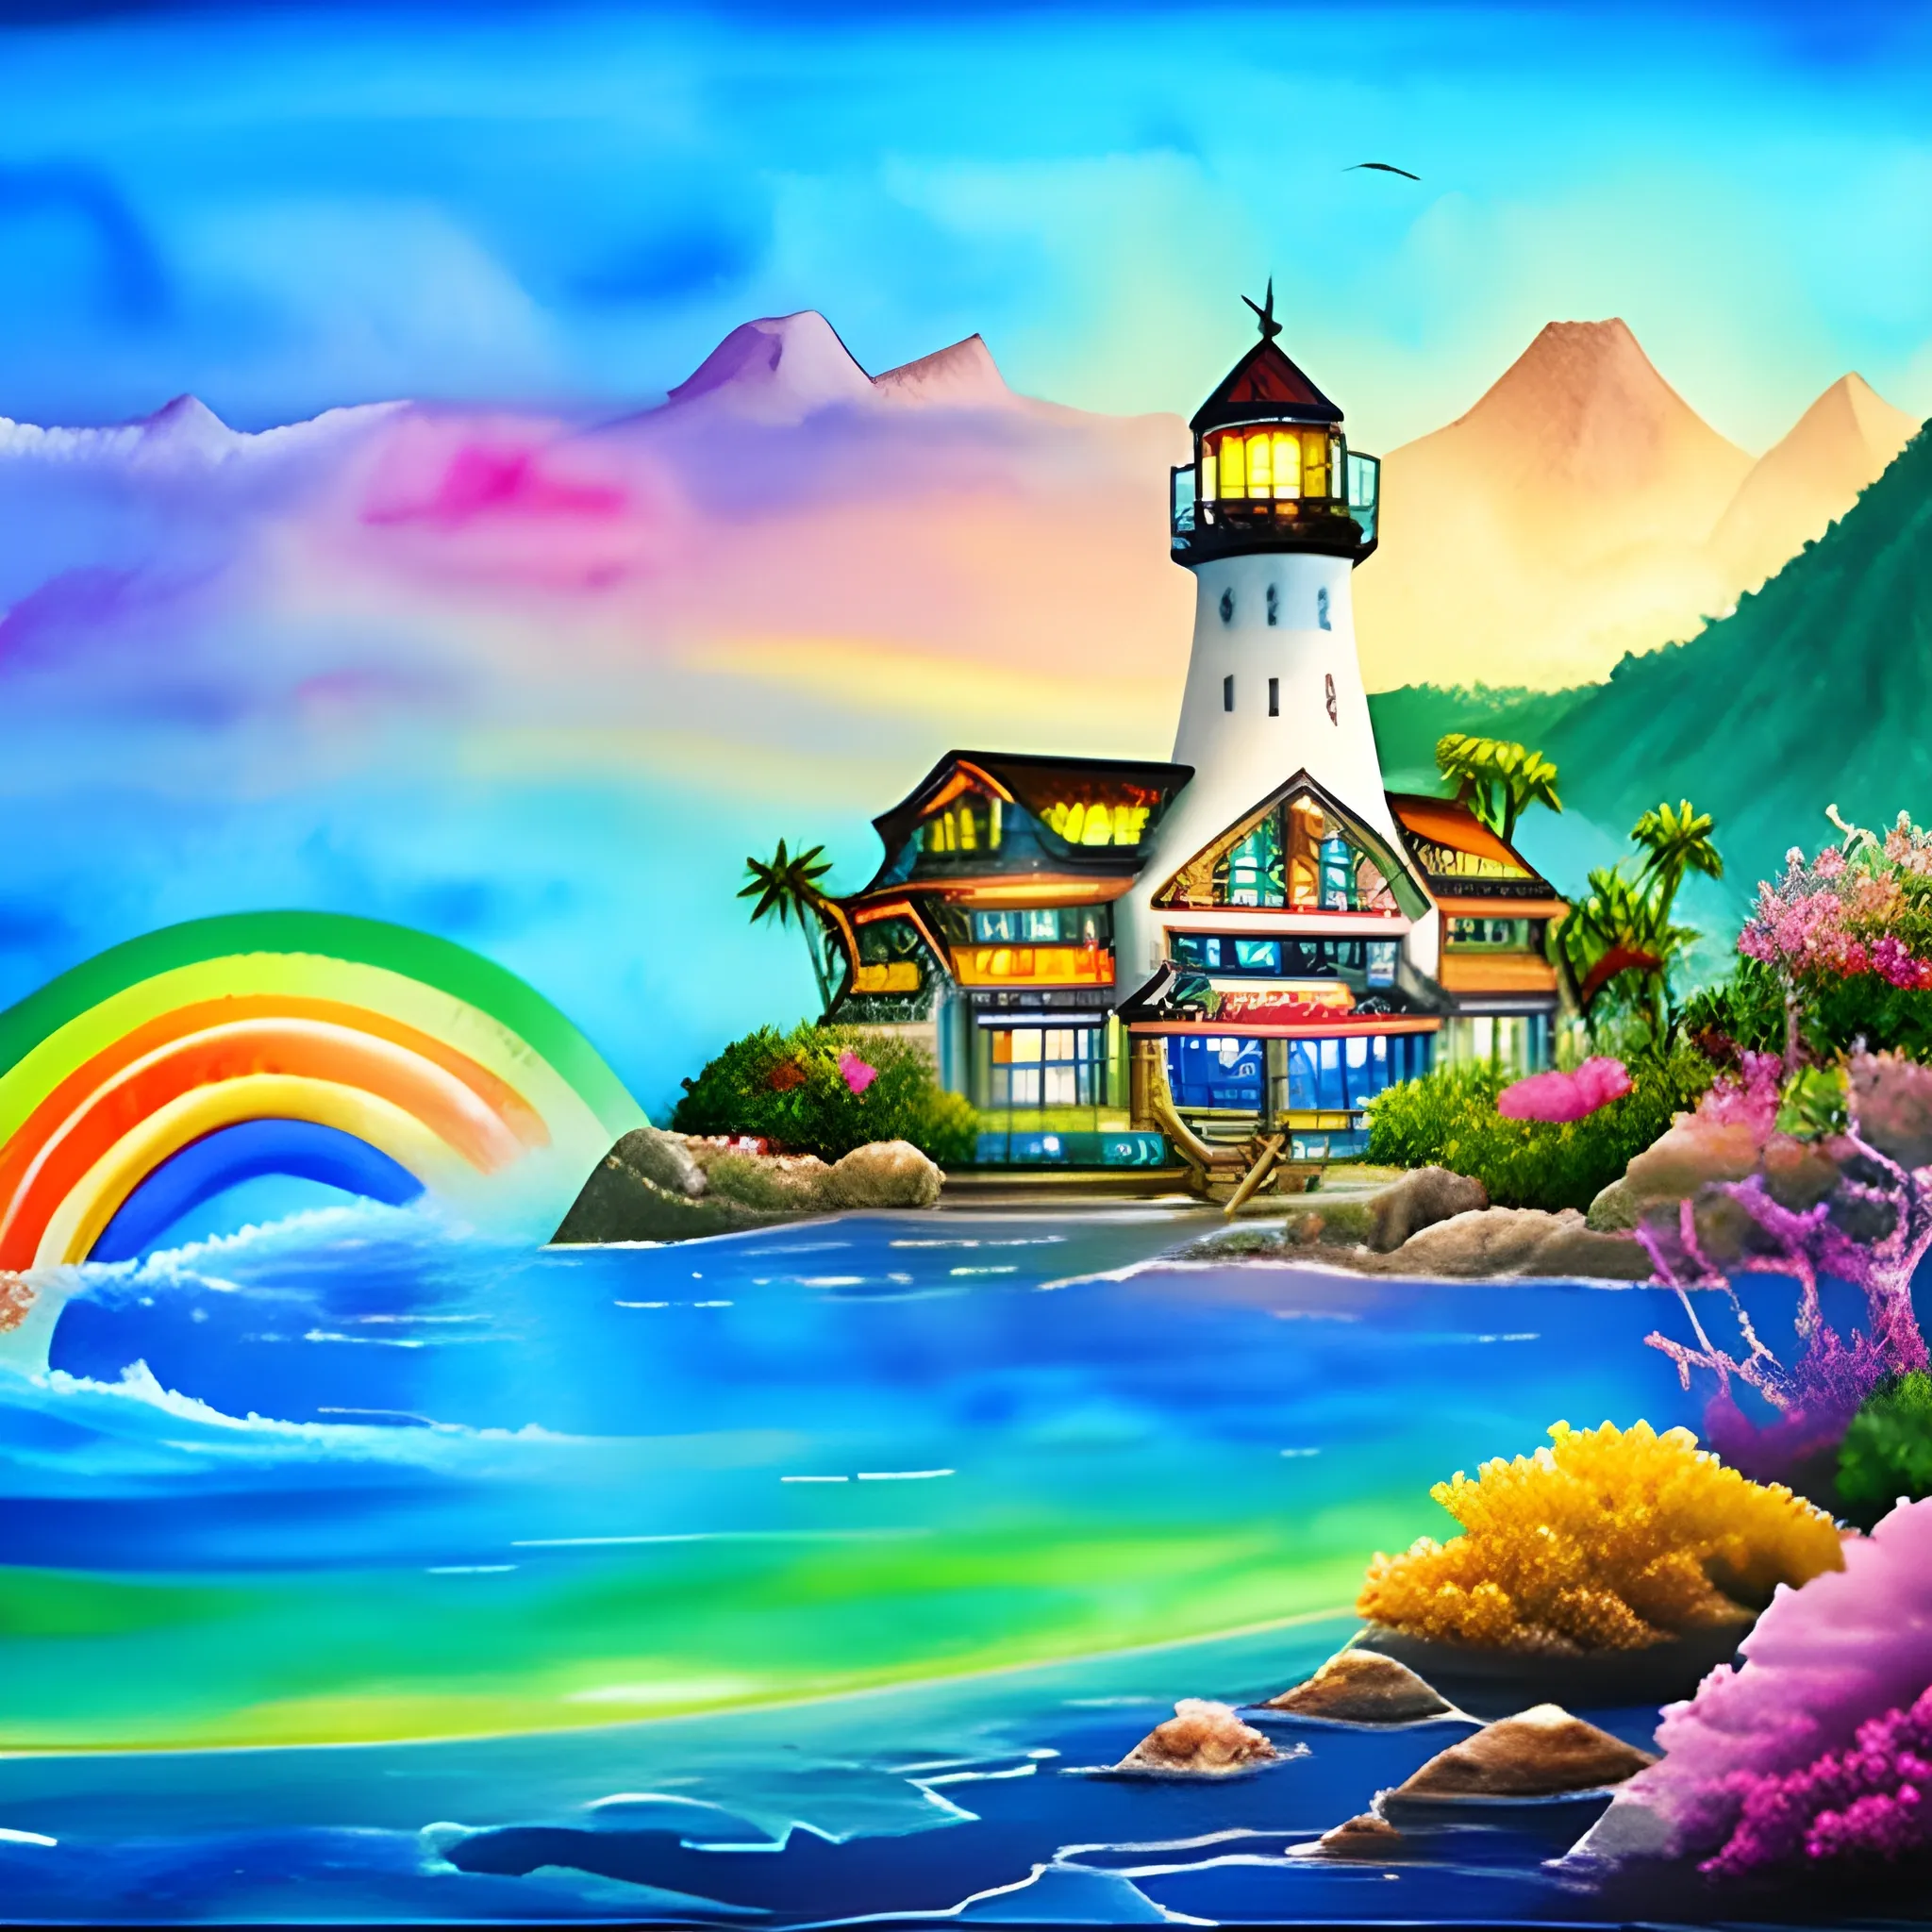 A small island shining in the summer osean center of the big osean, decorated with sea fish lights in a rainbow of colors.

 Trippy, Water Color, Oil Painting